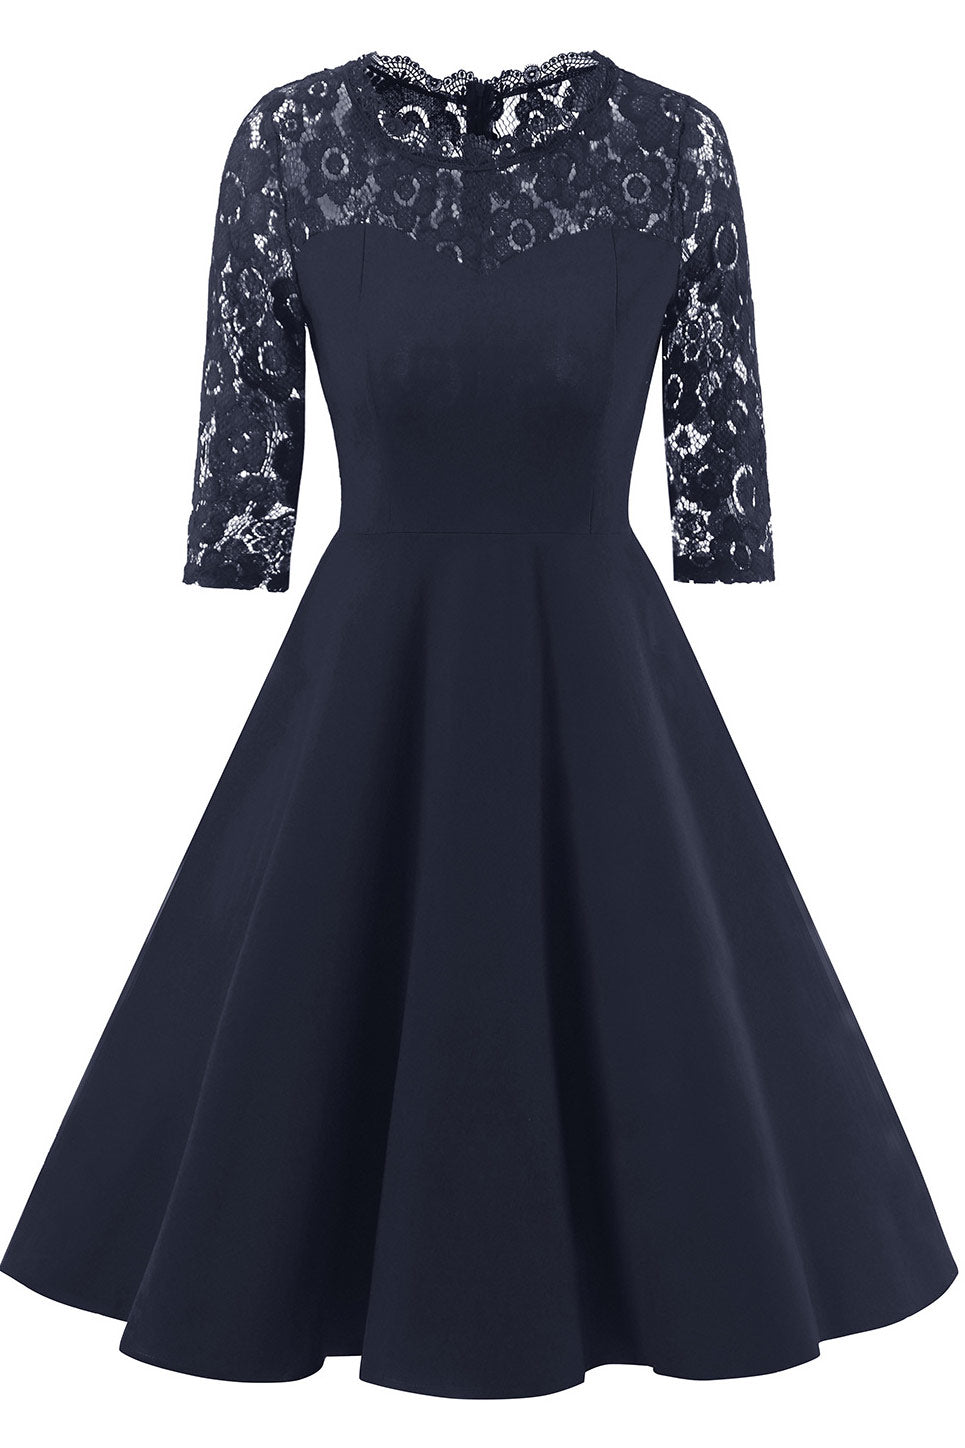 Black A-line Lace Fit And Flare Prom Dress With Half Sleeves